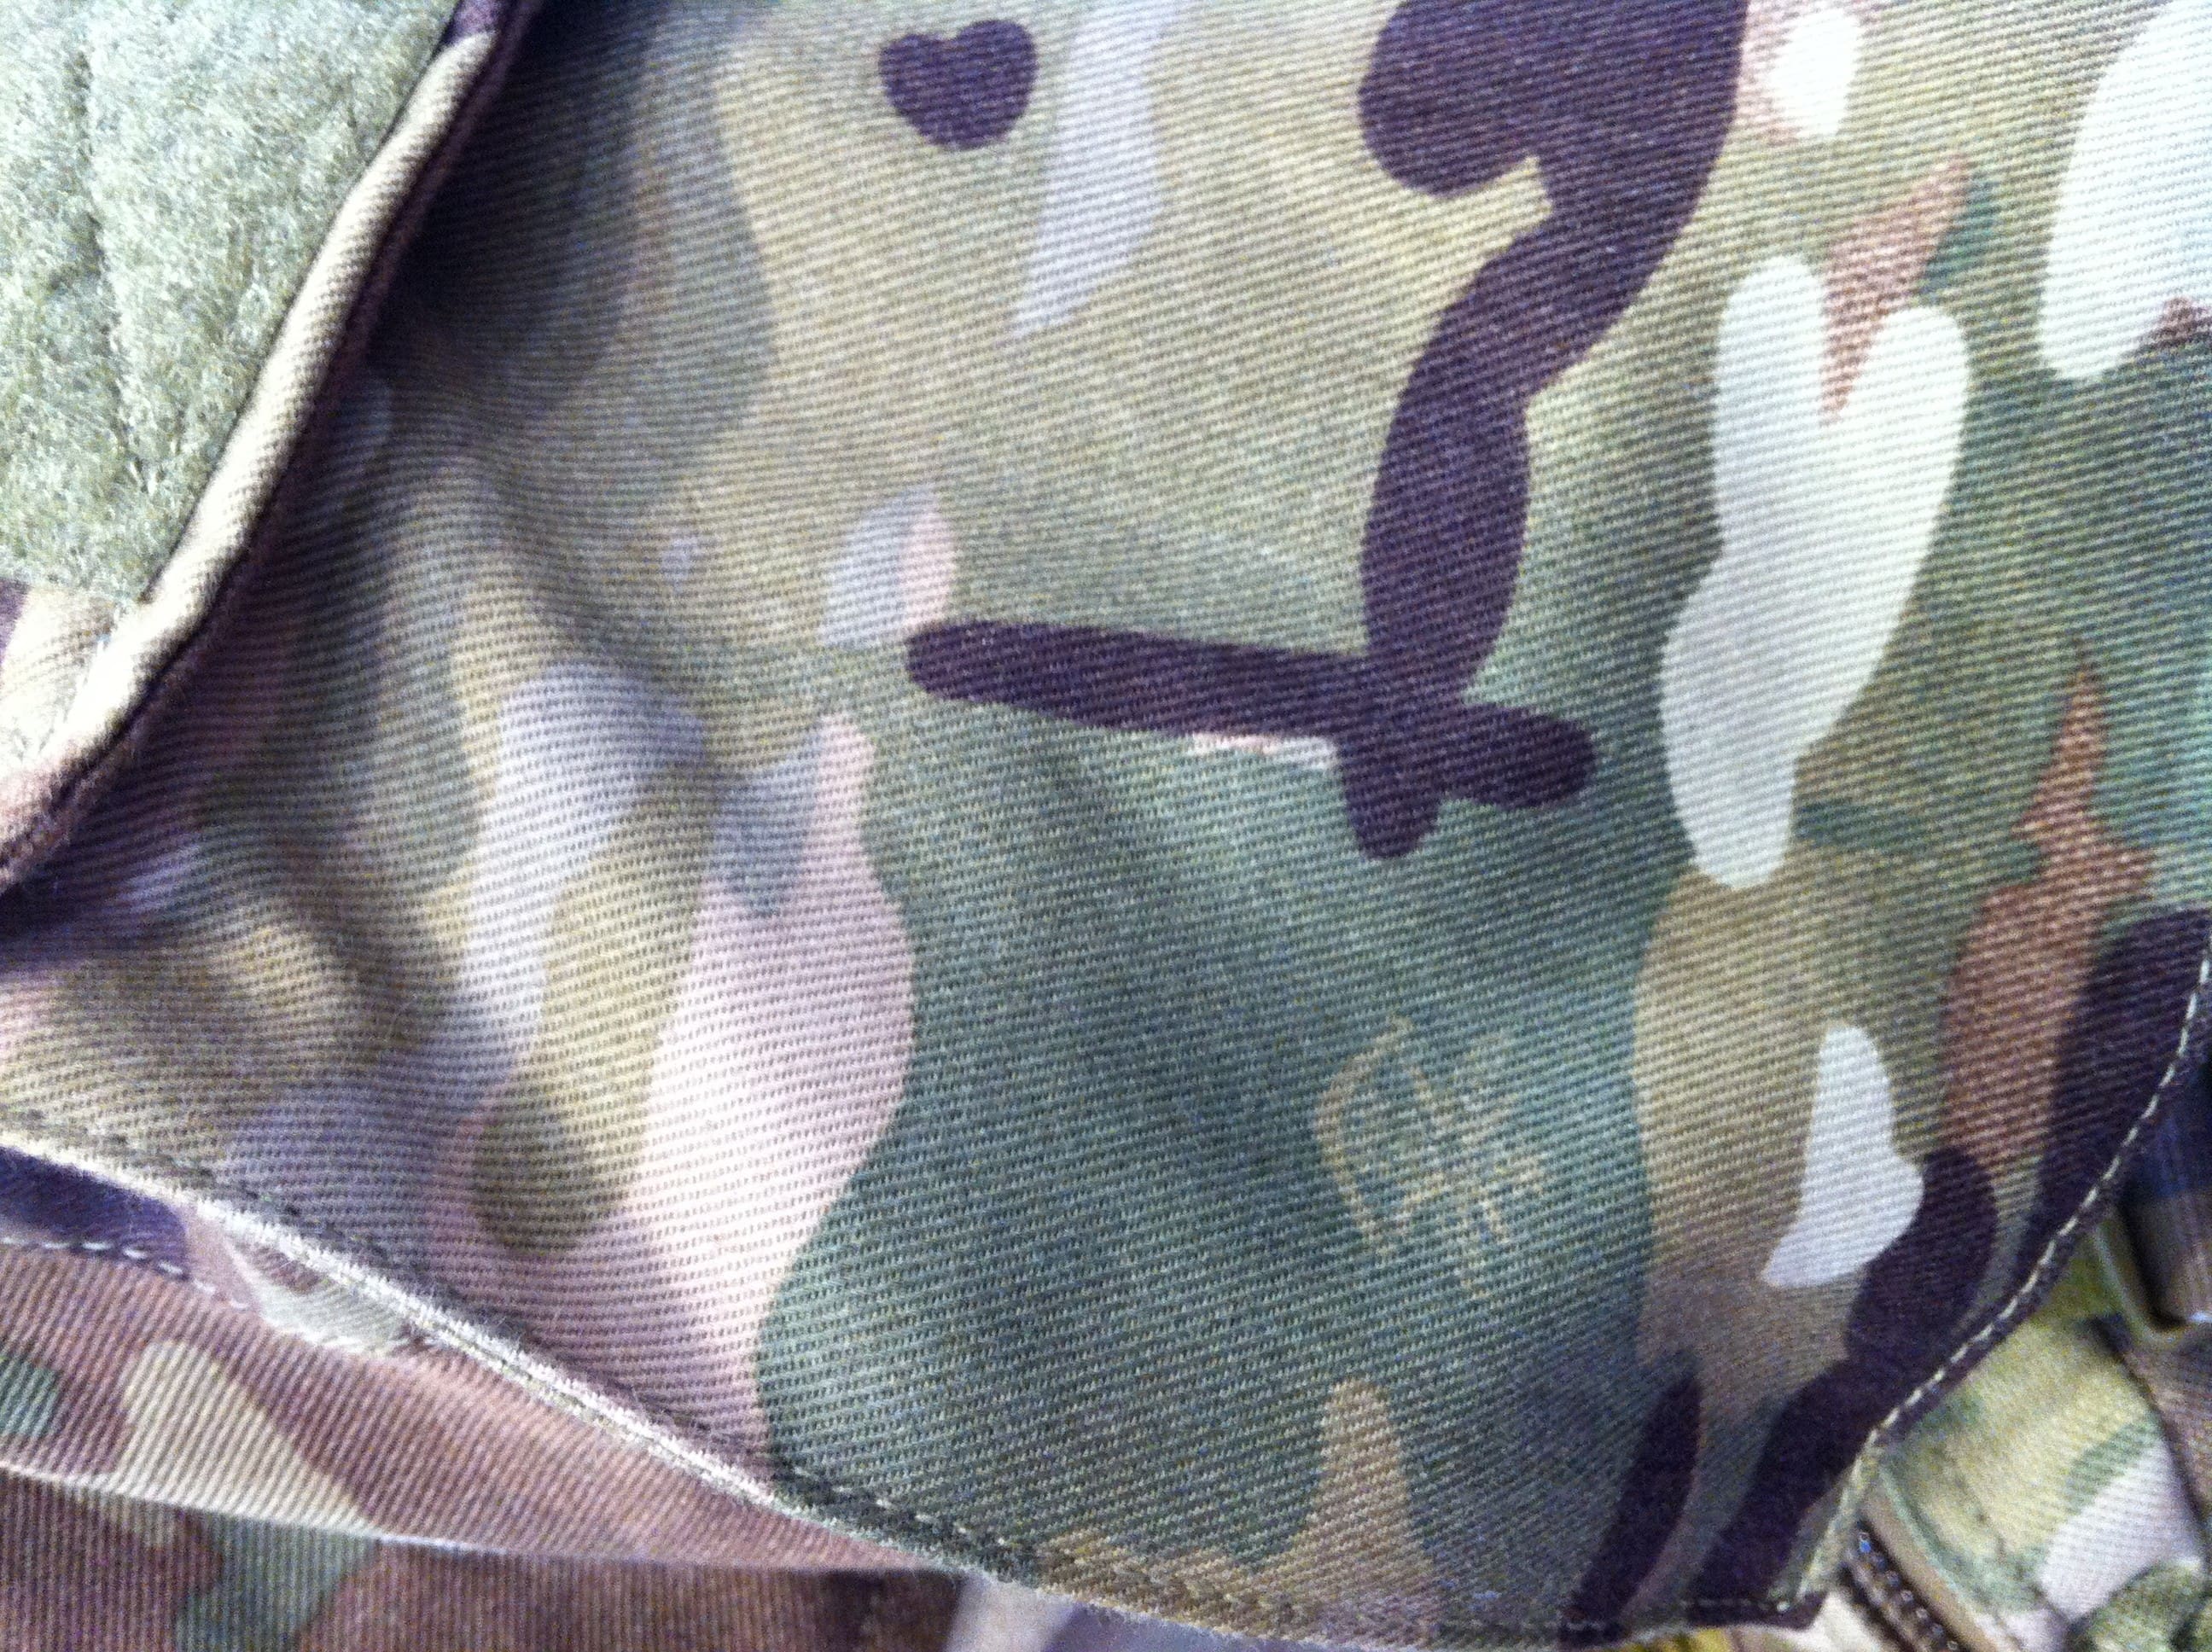 How To Know If It’s Genuine Australian MultiCam Pattern - Soldier ...